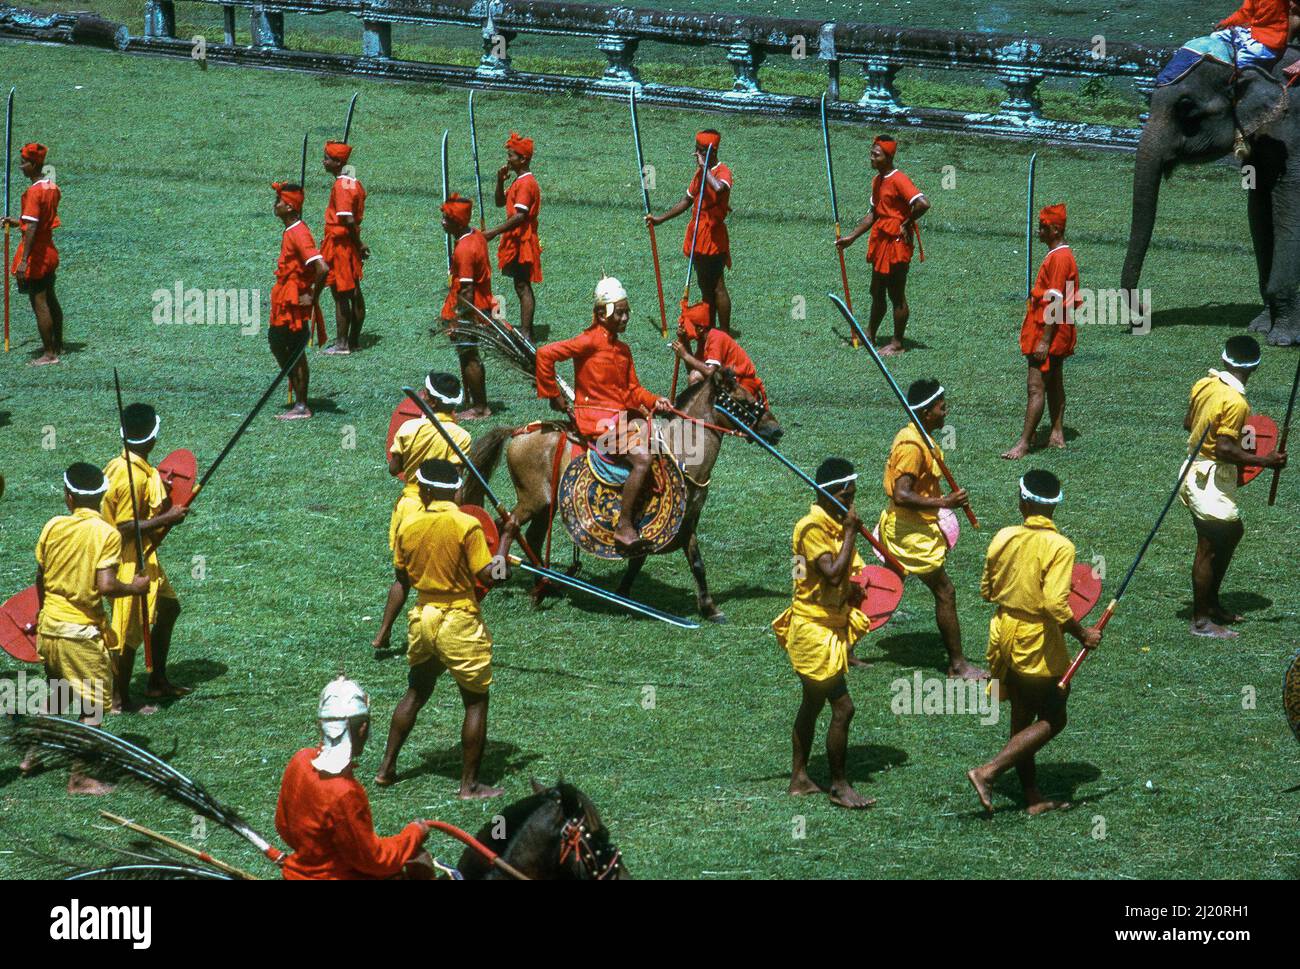 Costumed actors re-enact historic battles for a movie being directed by Prince Norodom Sihanouk, at Angkor Wat, Cambodia, 1966 Stock Photo